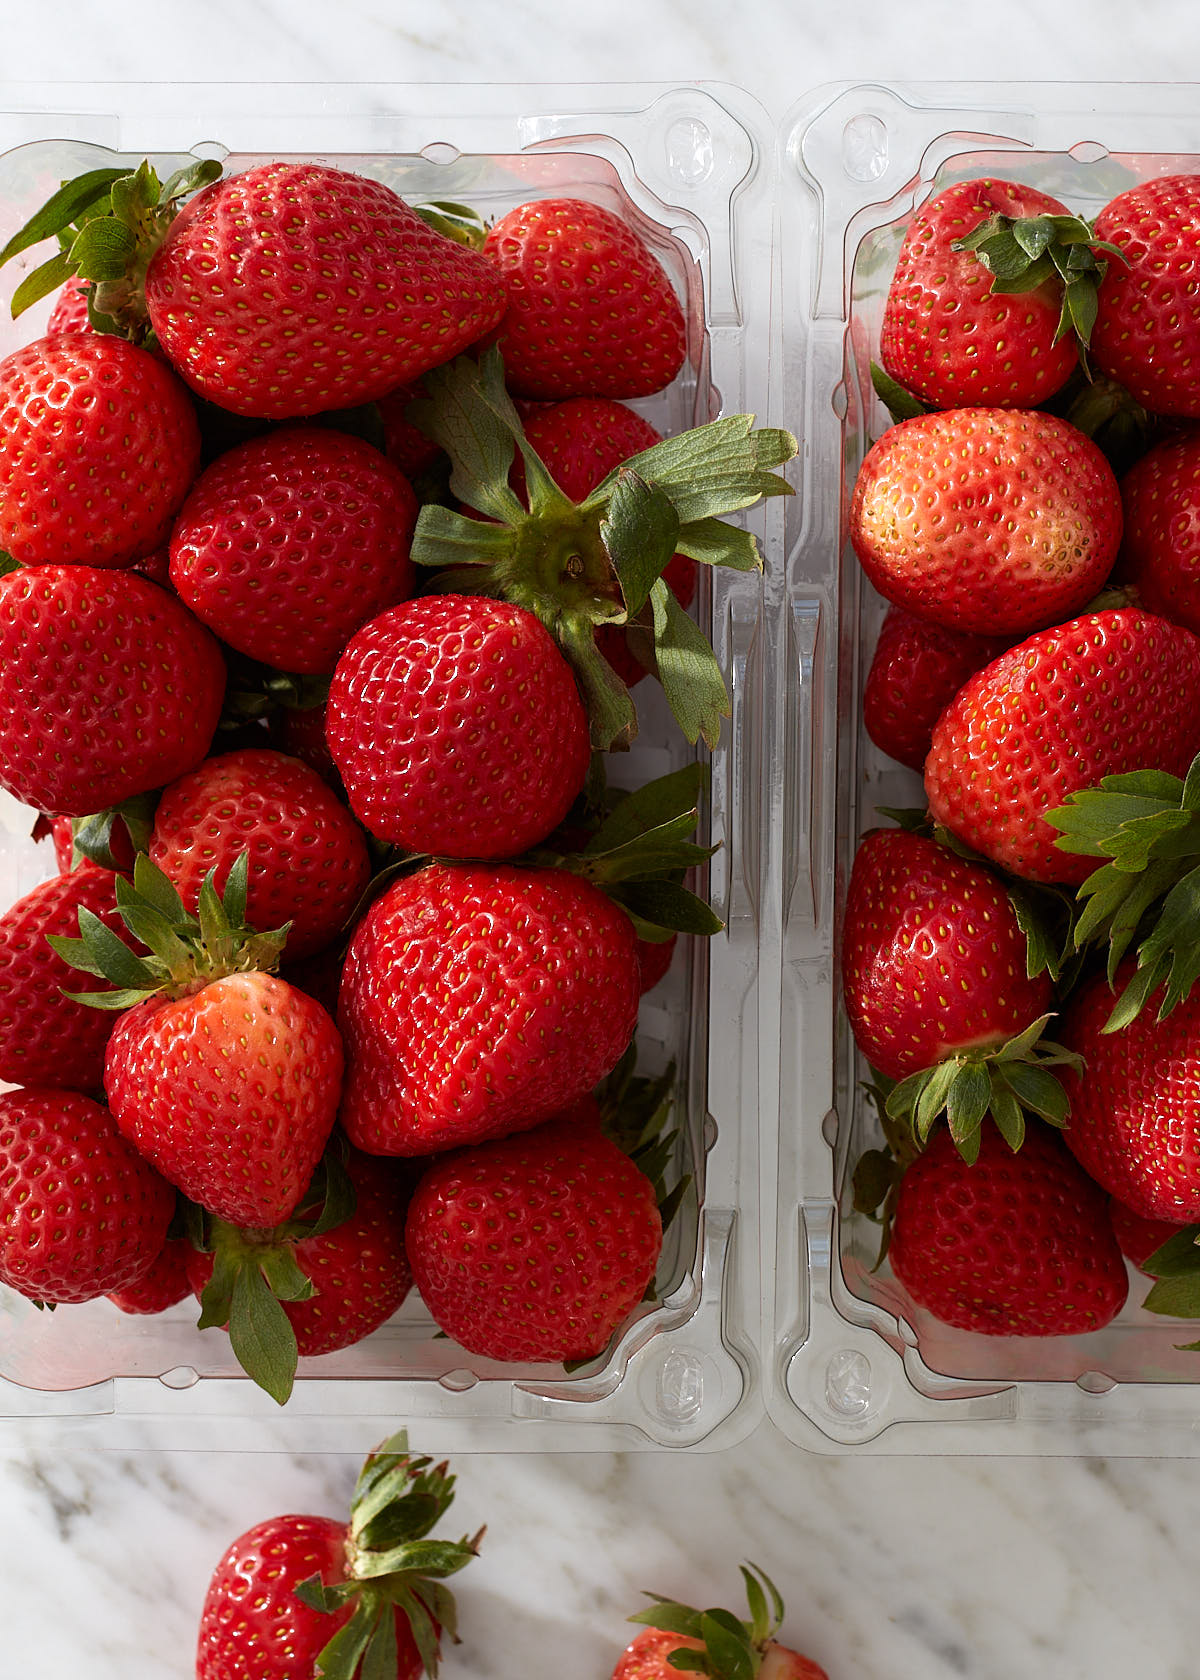 Close up of fresh strawberries in clear store containers.